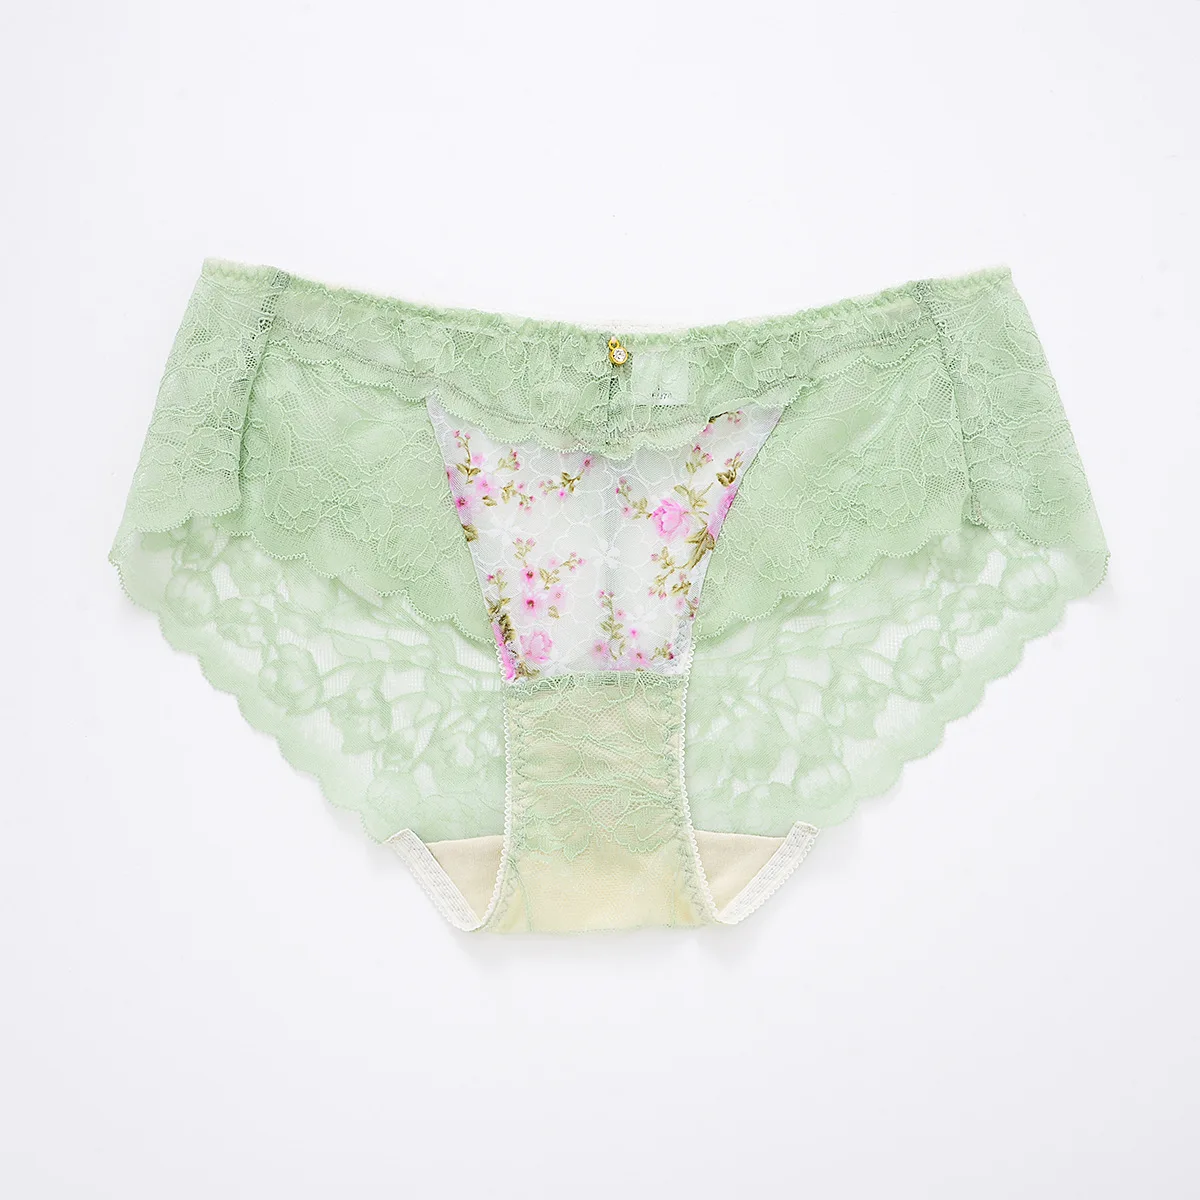 Small floral lace light and breathable design fashion ladies briefs.